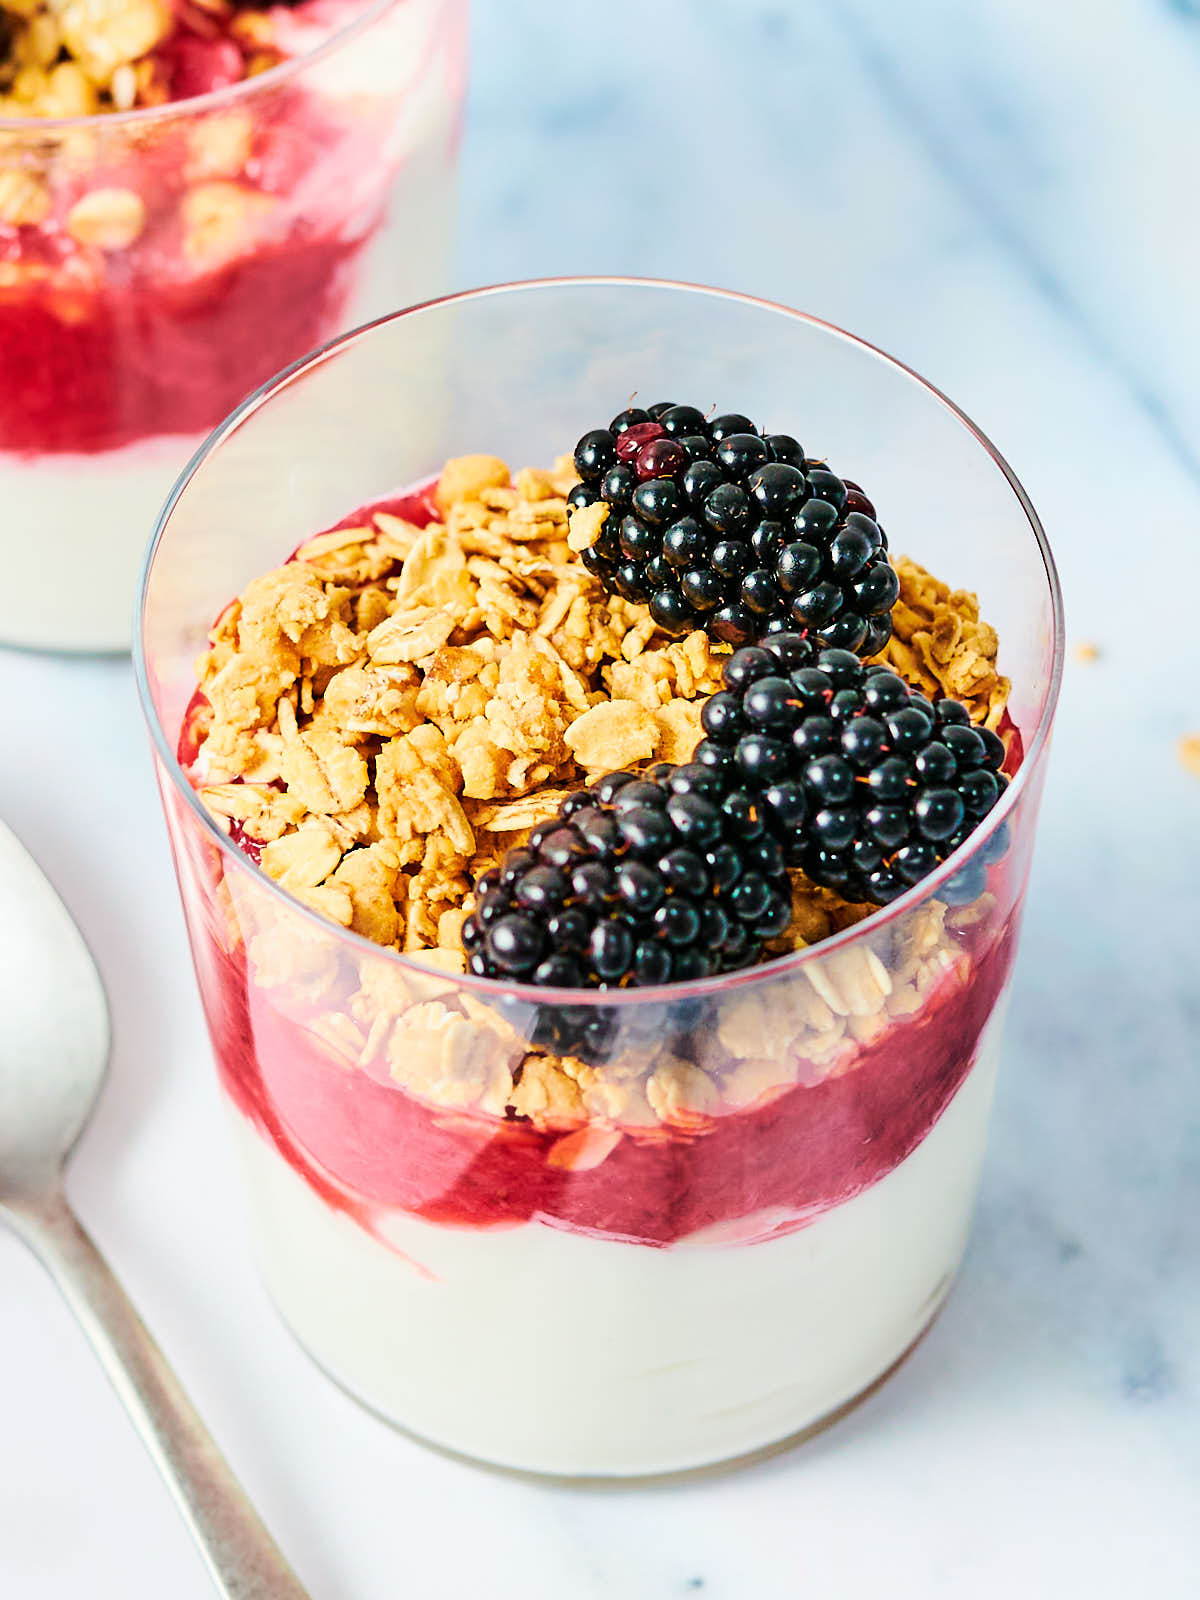 Yogurt, strawberry compote, granola, and berries in a glass cup.